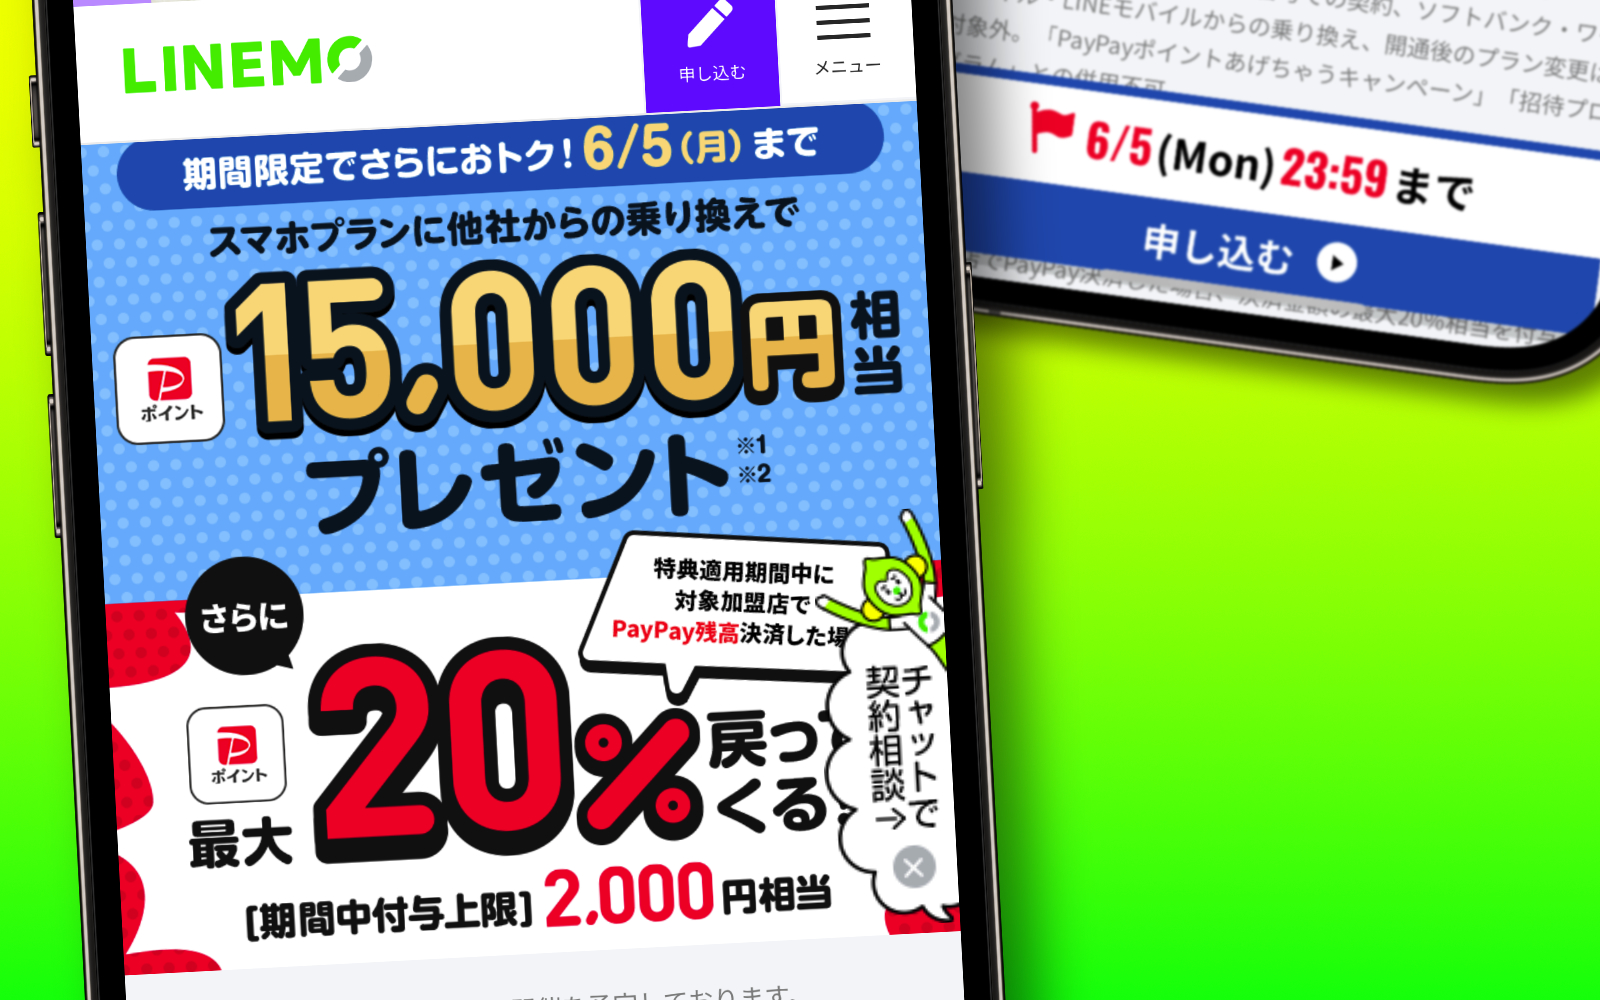 LINEMO PayPay Point Campaign